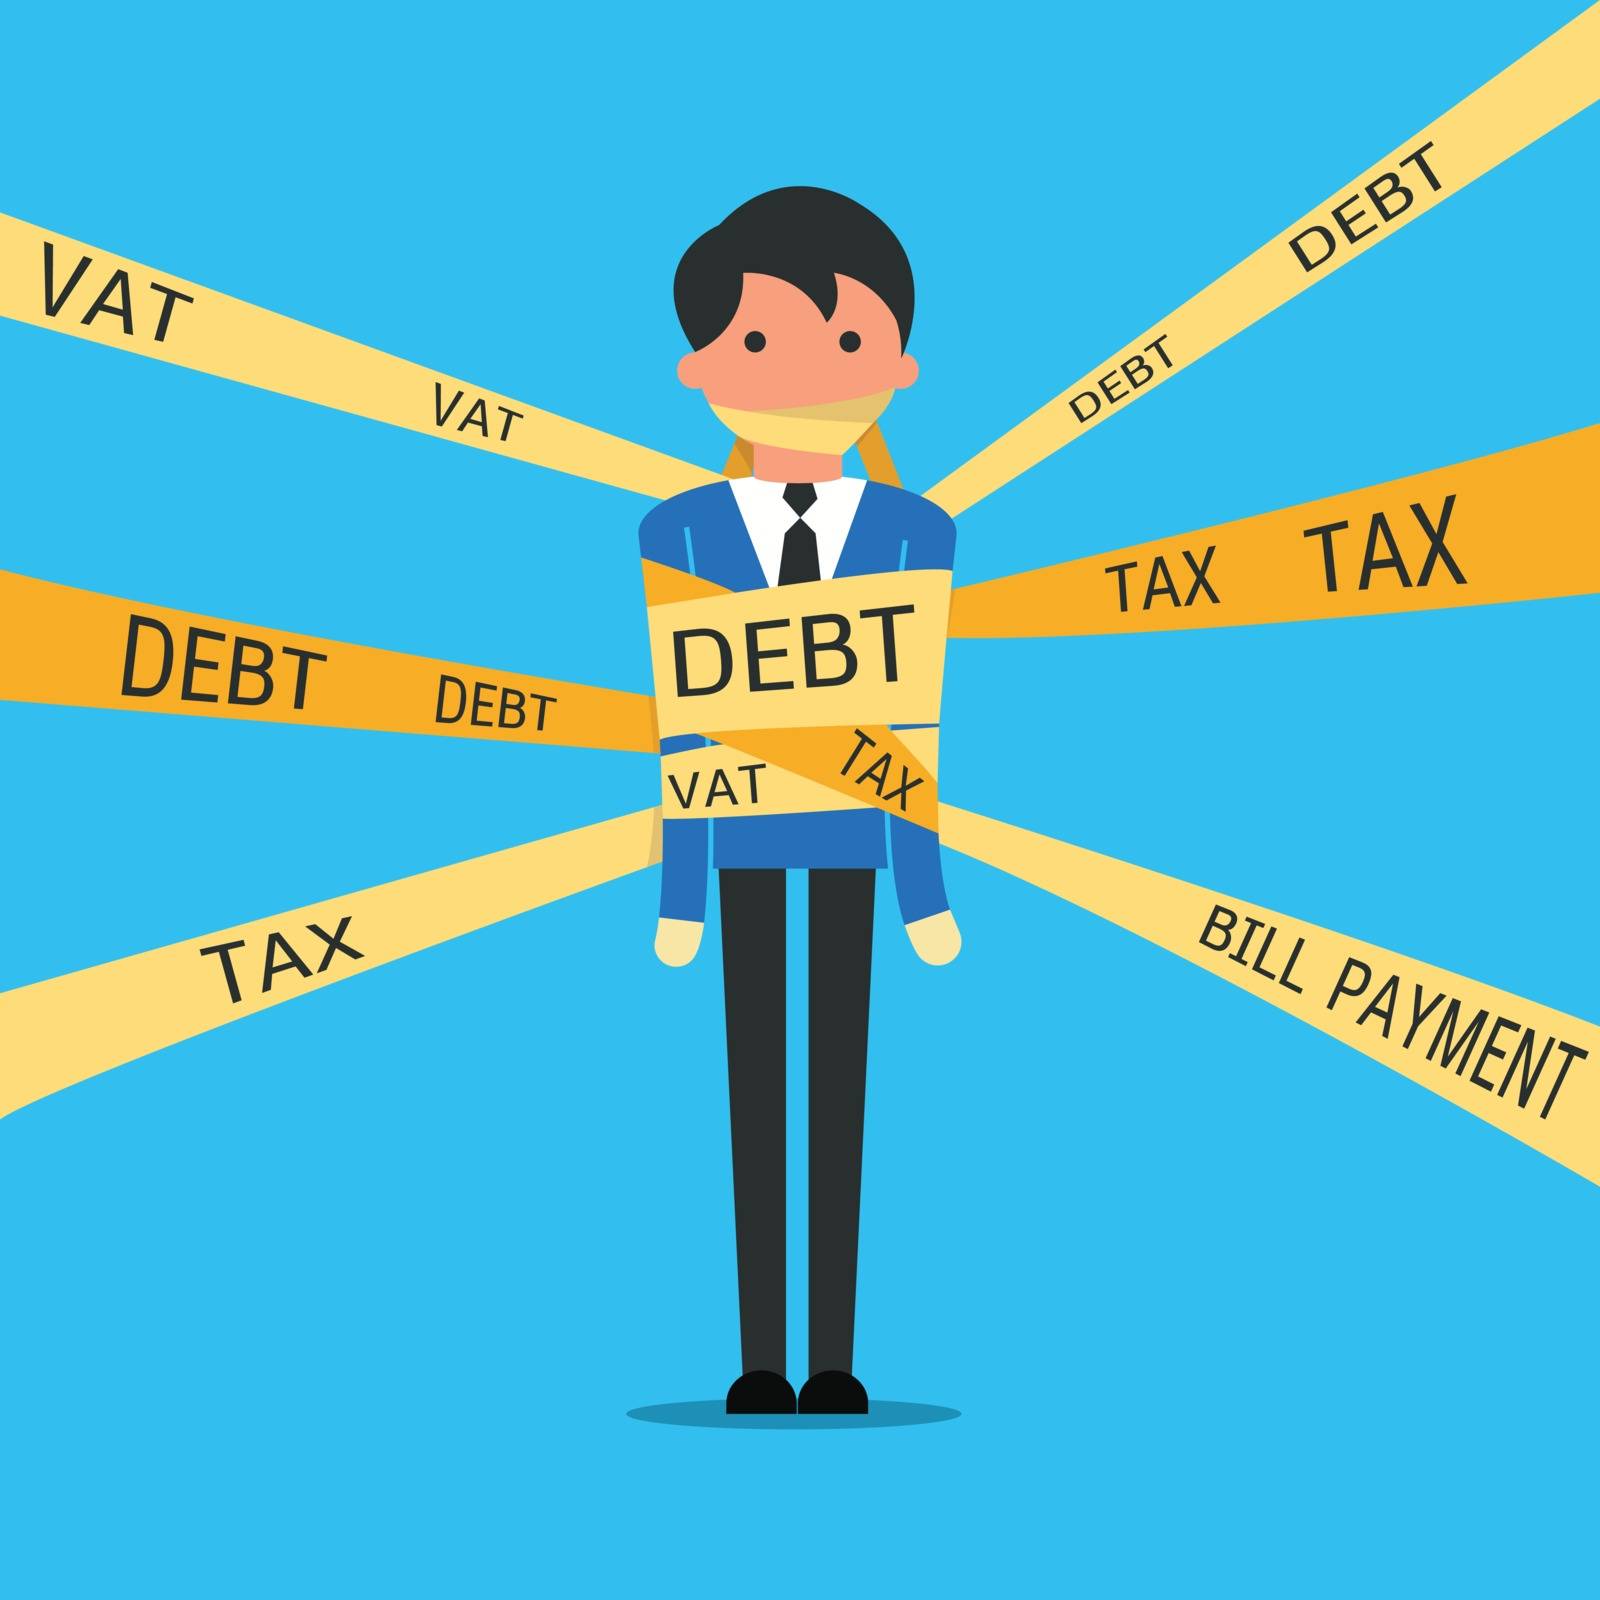 Businessman being wrapped with warning tape strips with text, debt, tax, vat, bill payment, in concept of being trapped with debt. You can change your own text and design. 